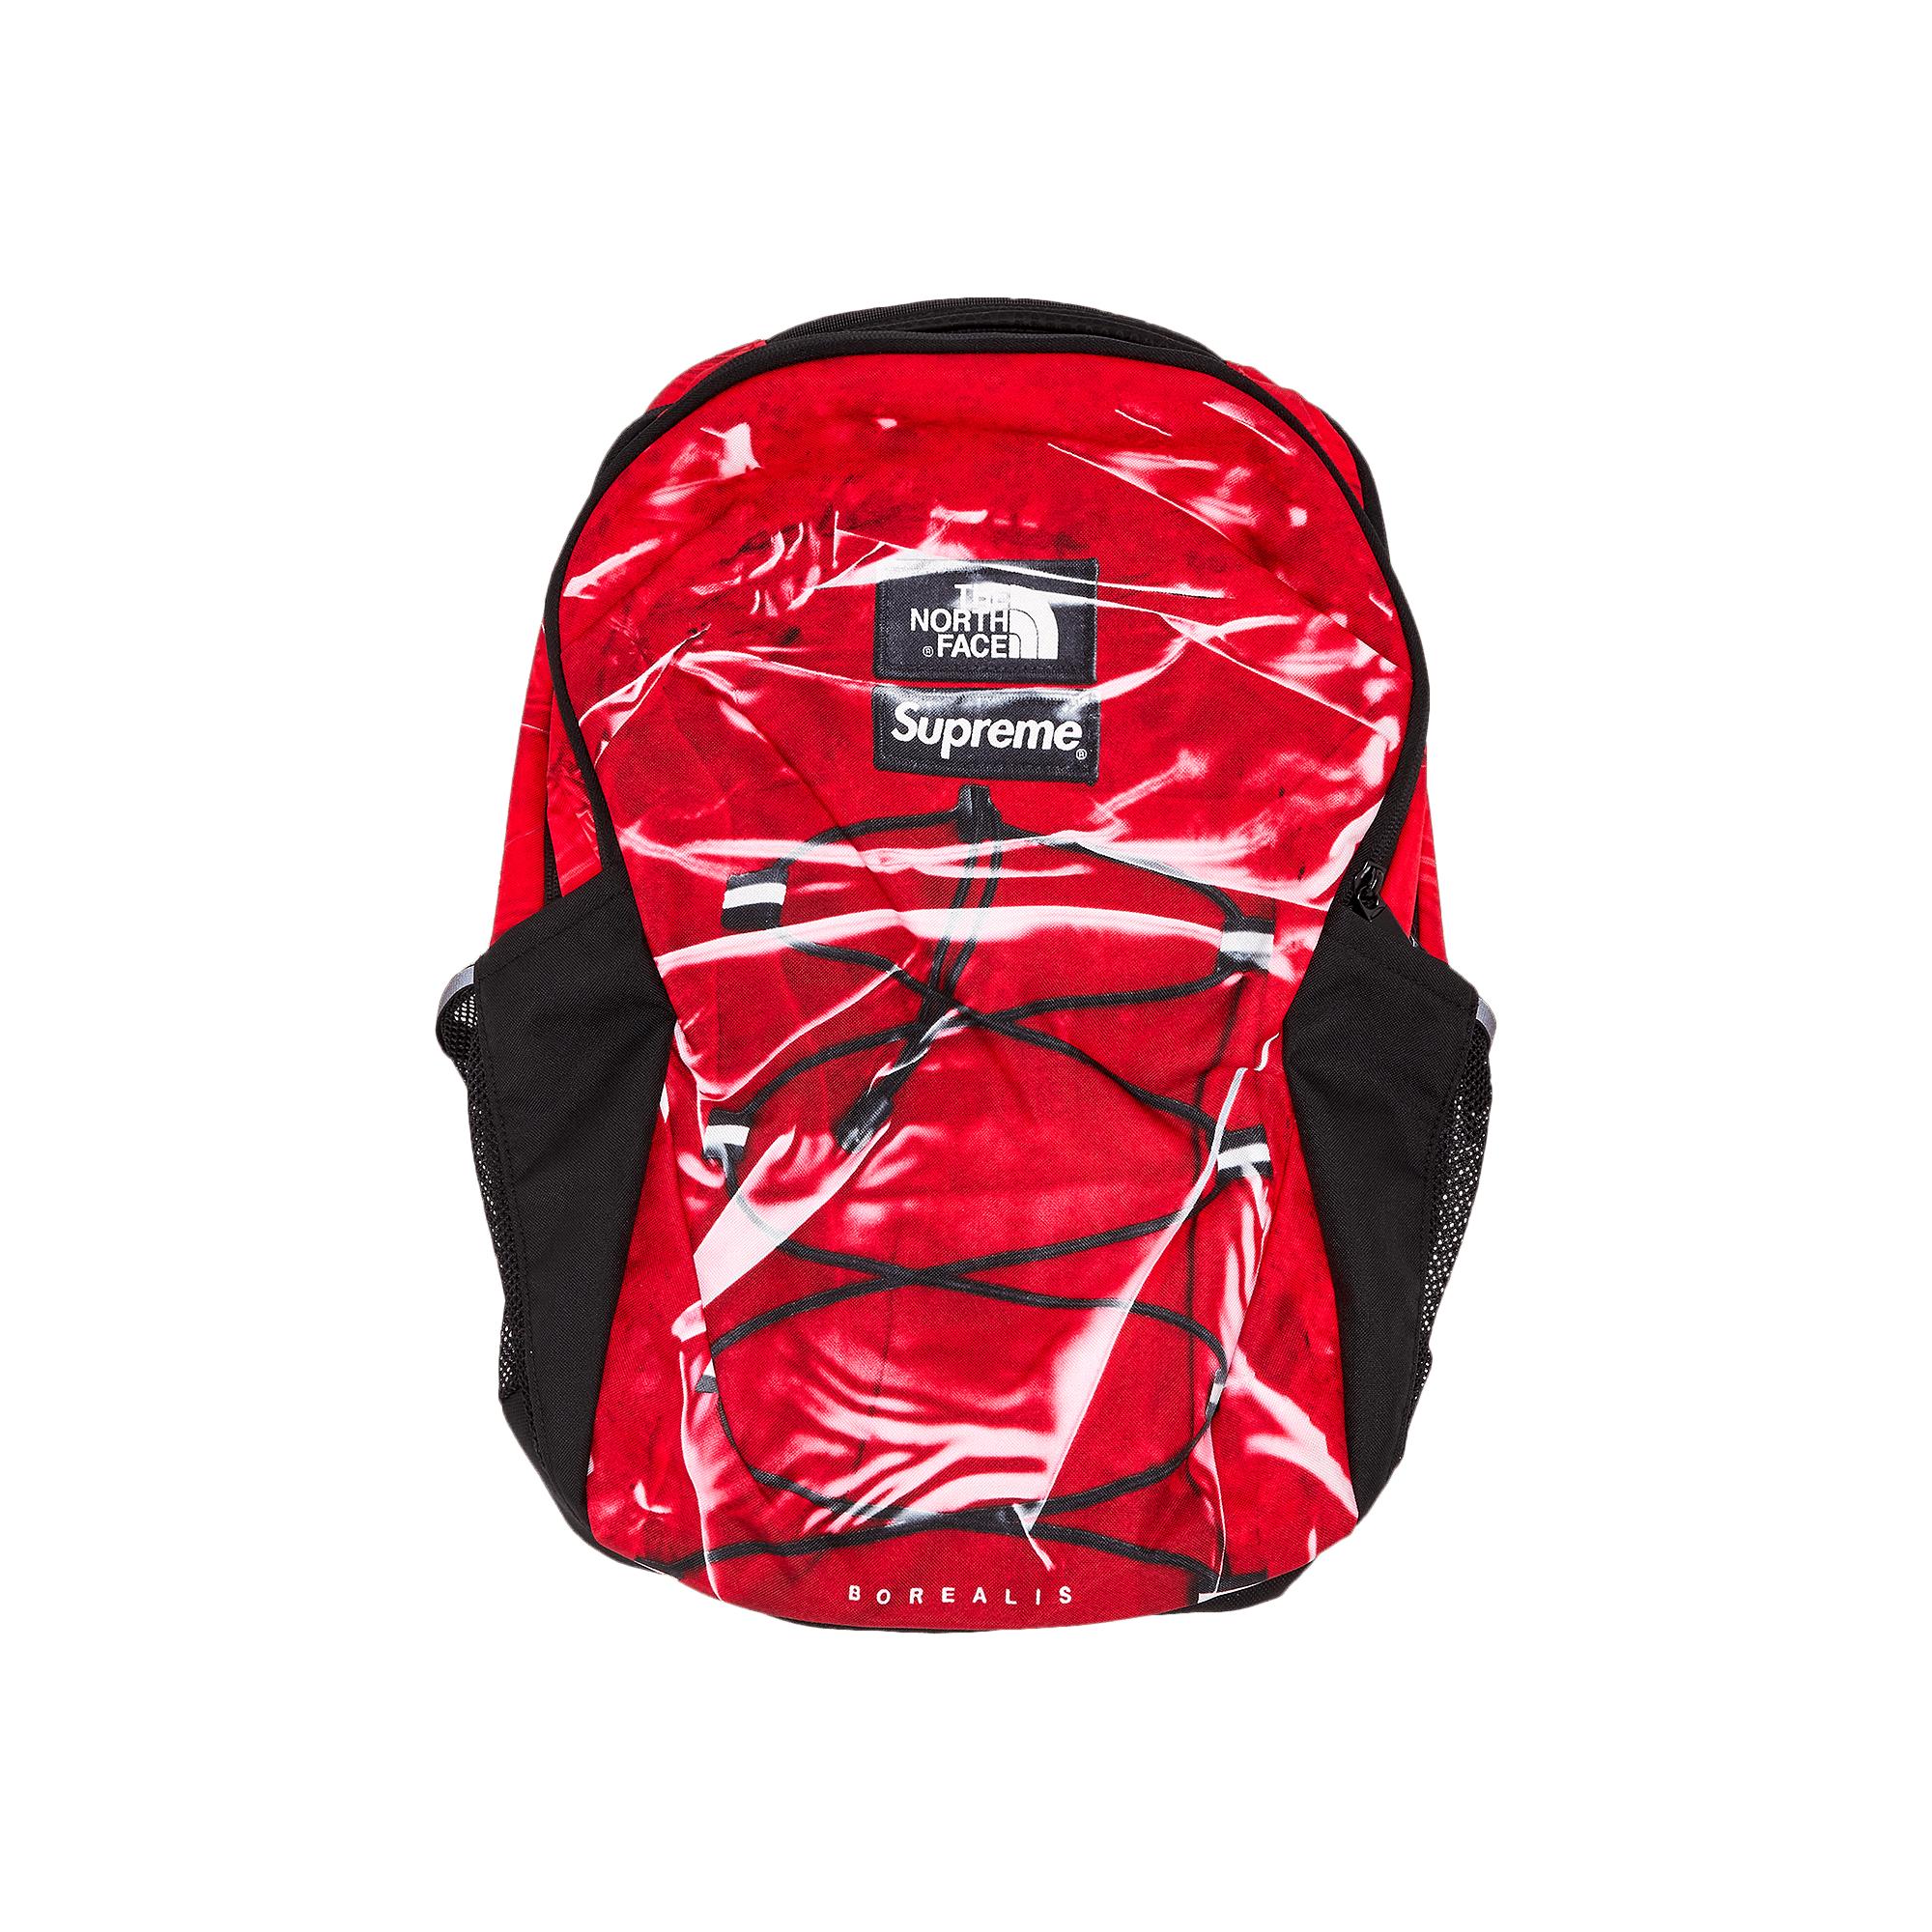 Supreme X The North Face Printed Borealis Backpack 'red' for Men